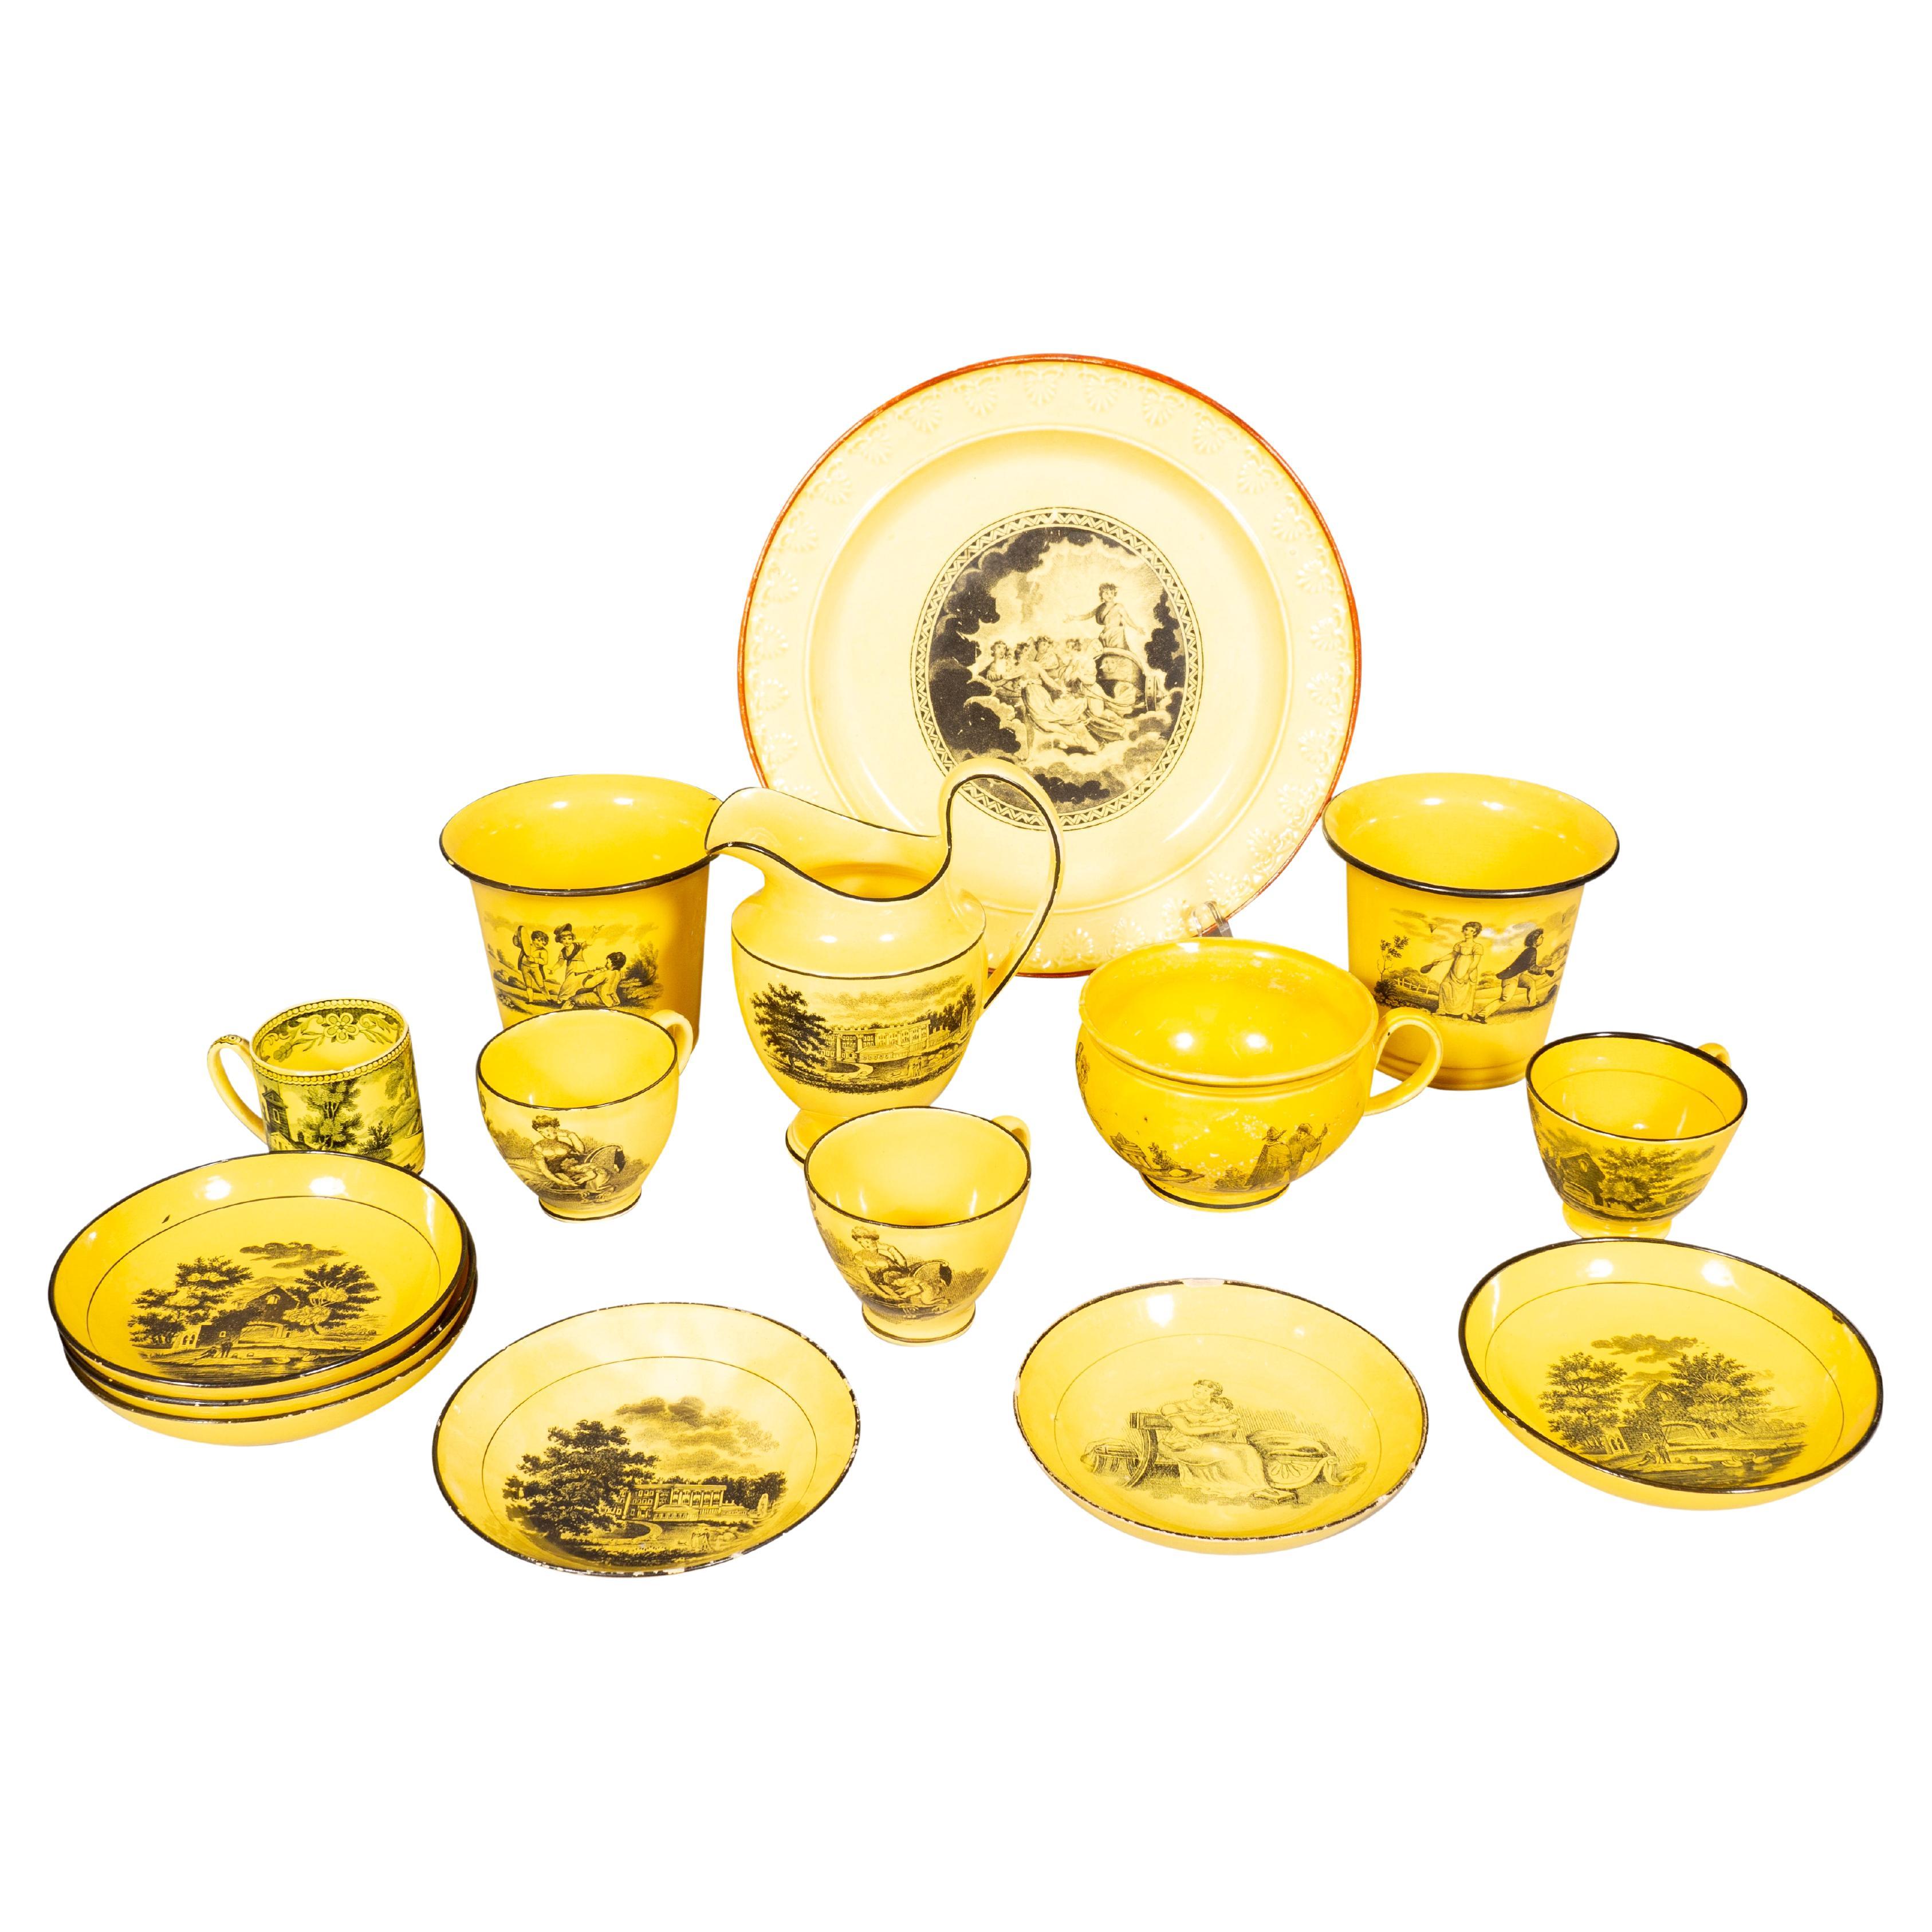 Fifteen Pieces Of Canary Yellow Staffordshire Pottery For Sale